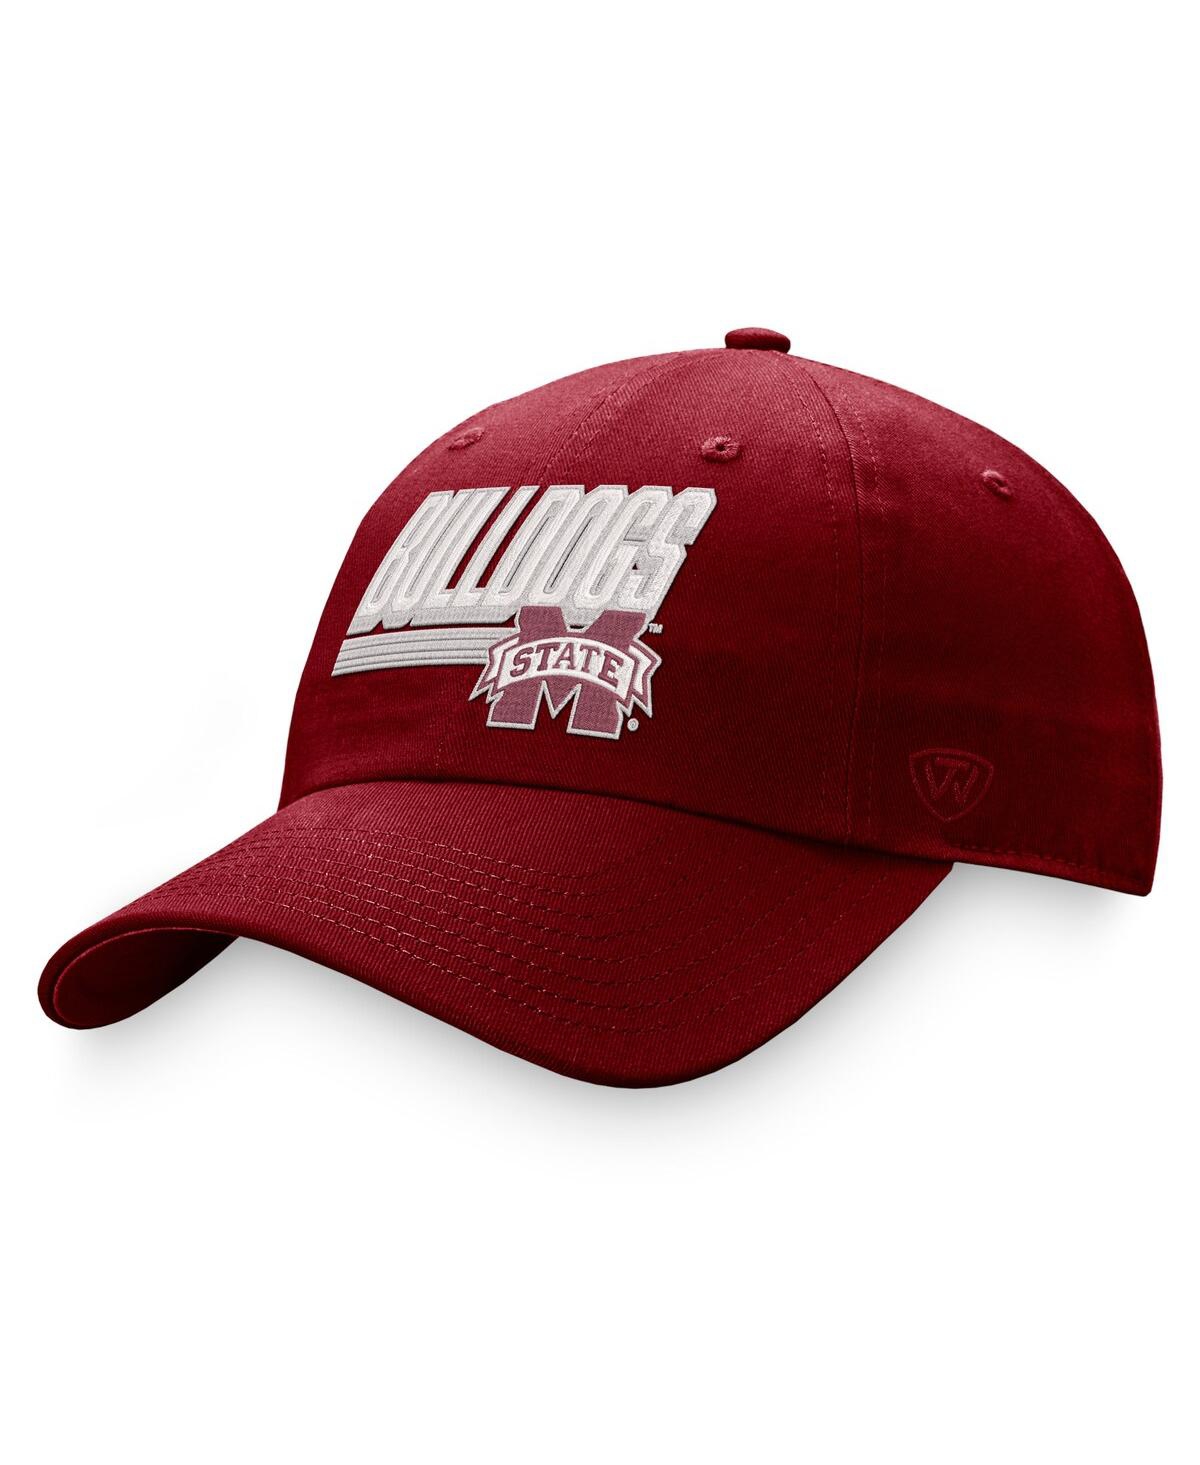 Shop Top Of The World Men's  Maroon Mississippi State Bulldogs Slice Adjustable Hat